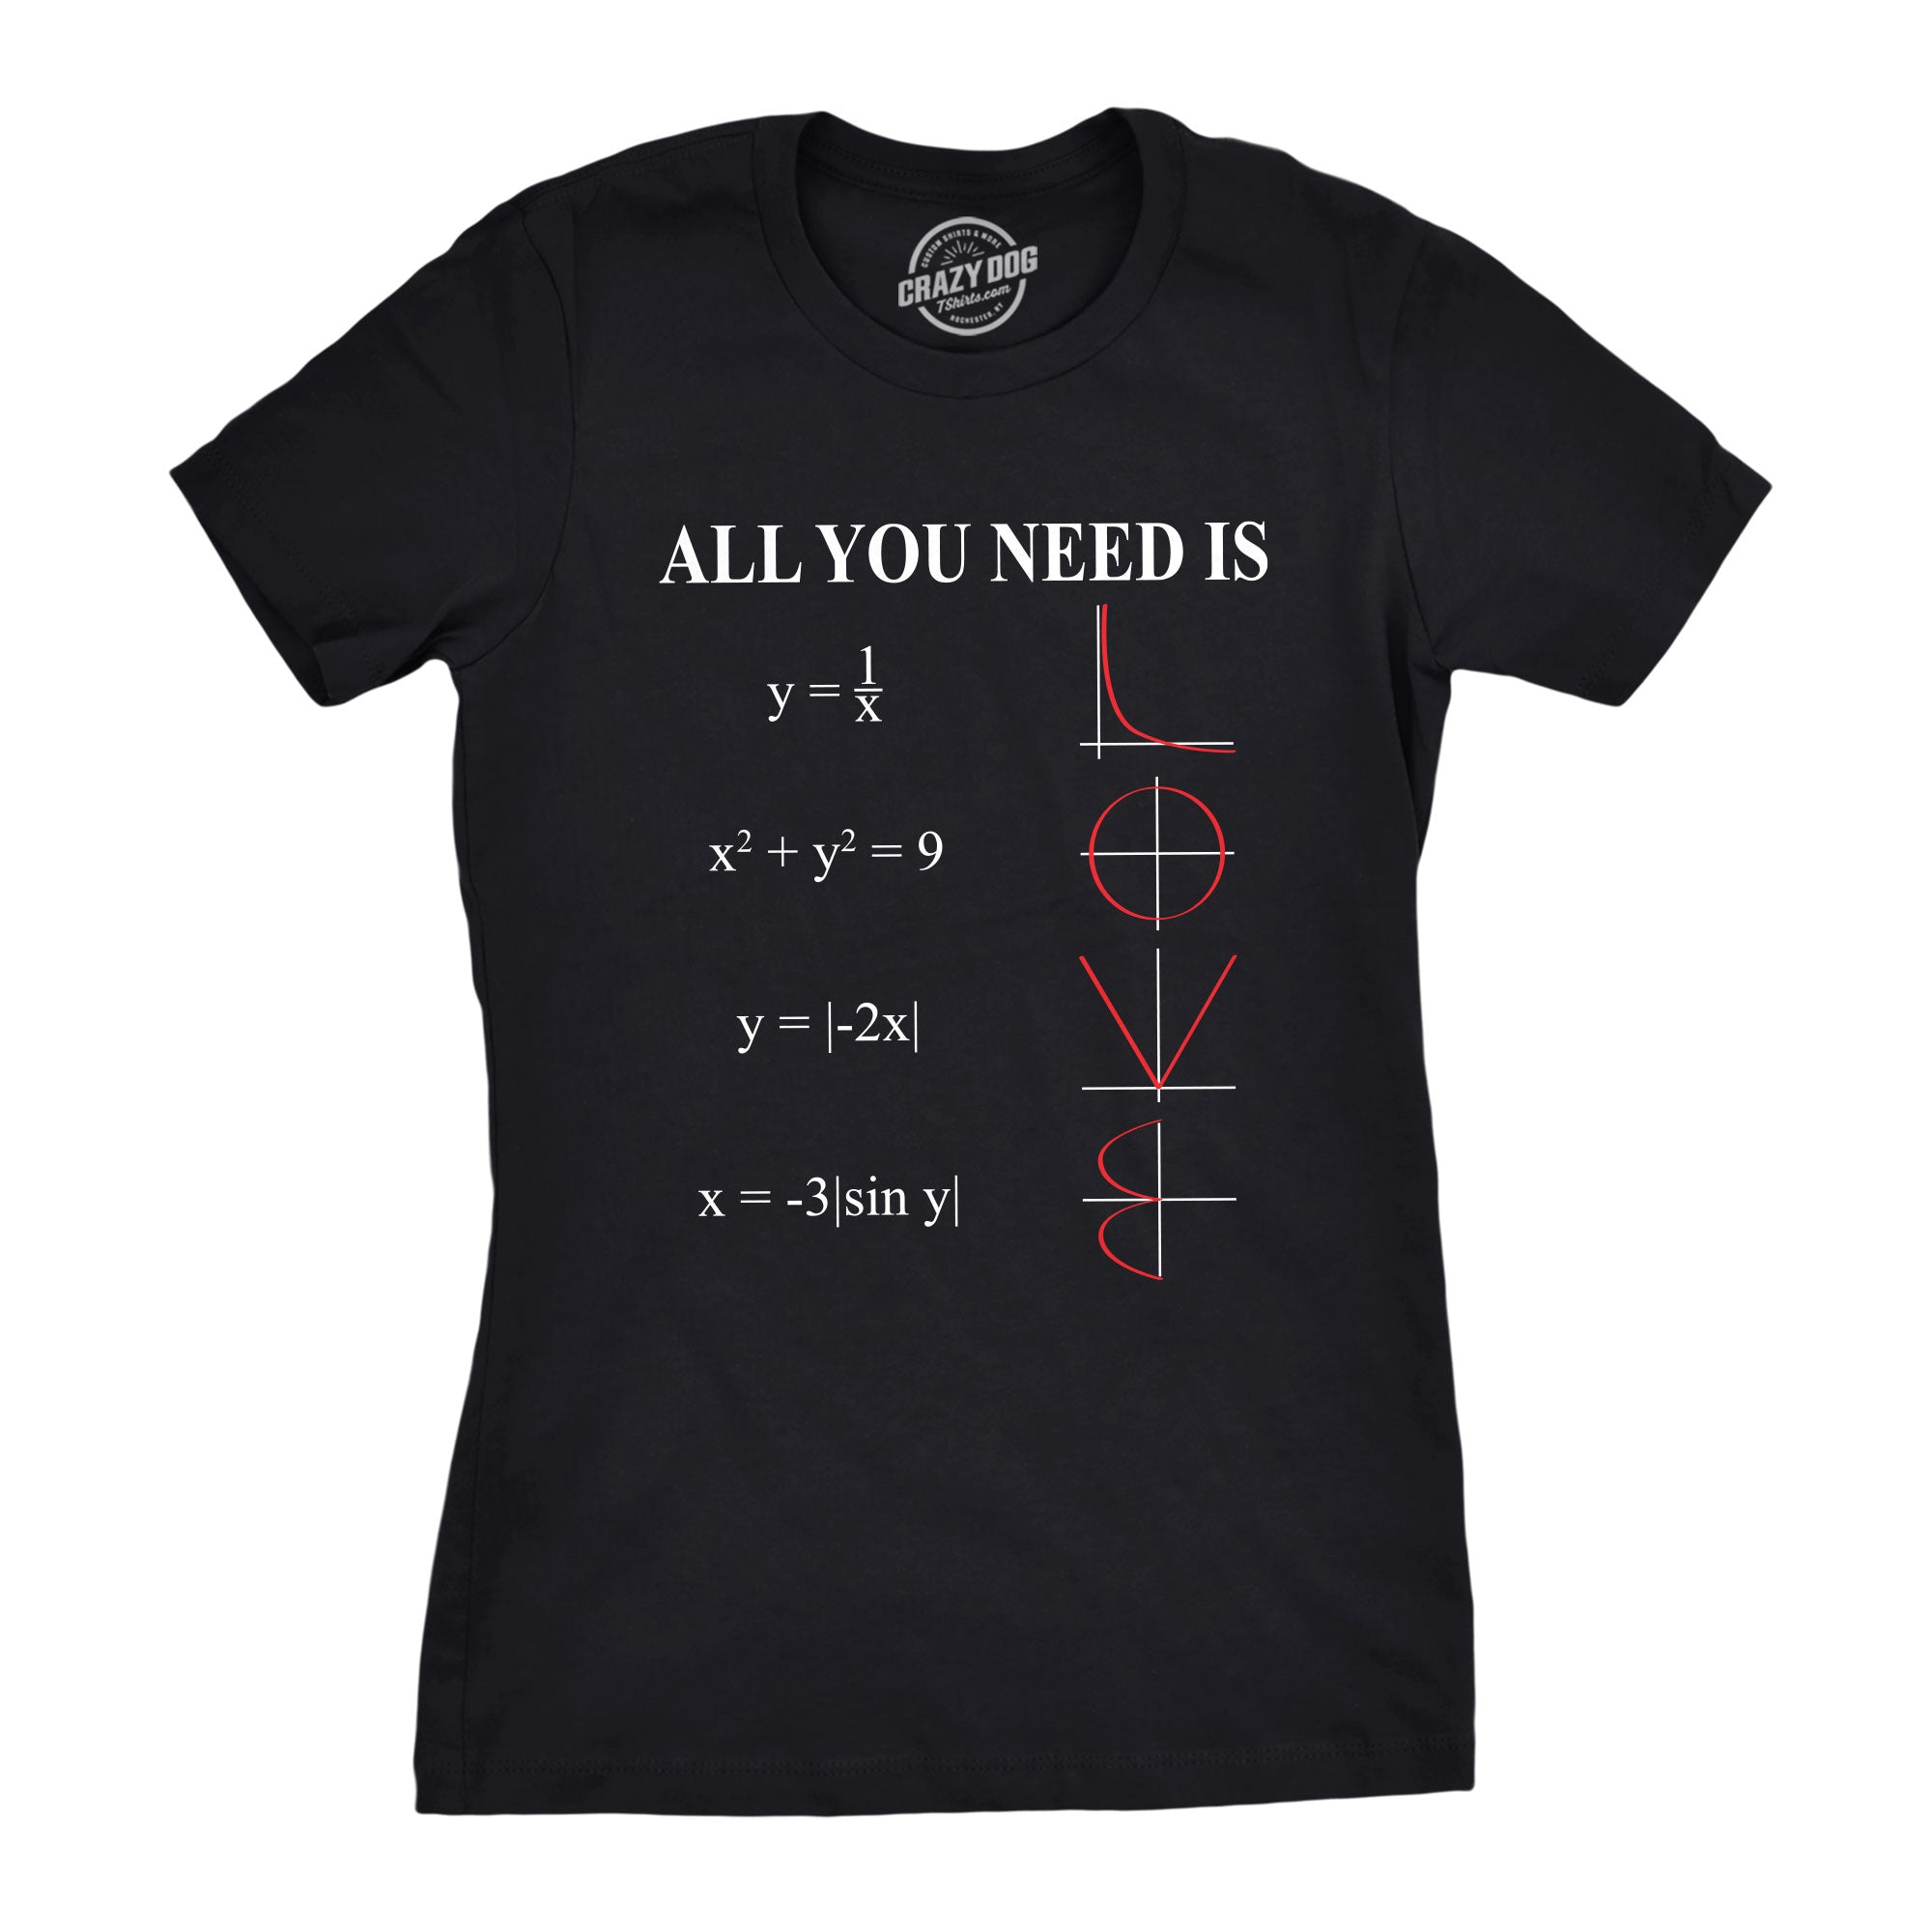 Funny Heather Black - Equation All You Need Is Love Womens T Shirt Nerdy Valentine's Day Math Nerdy Tee